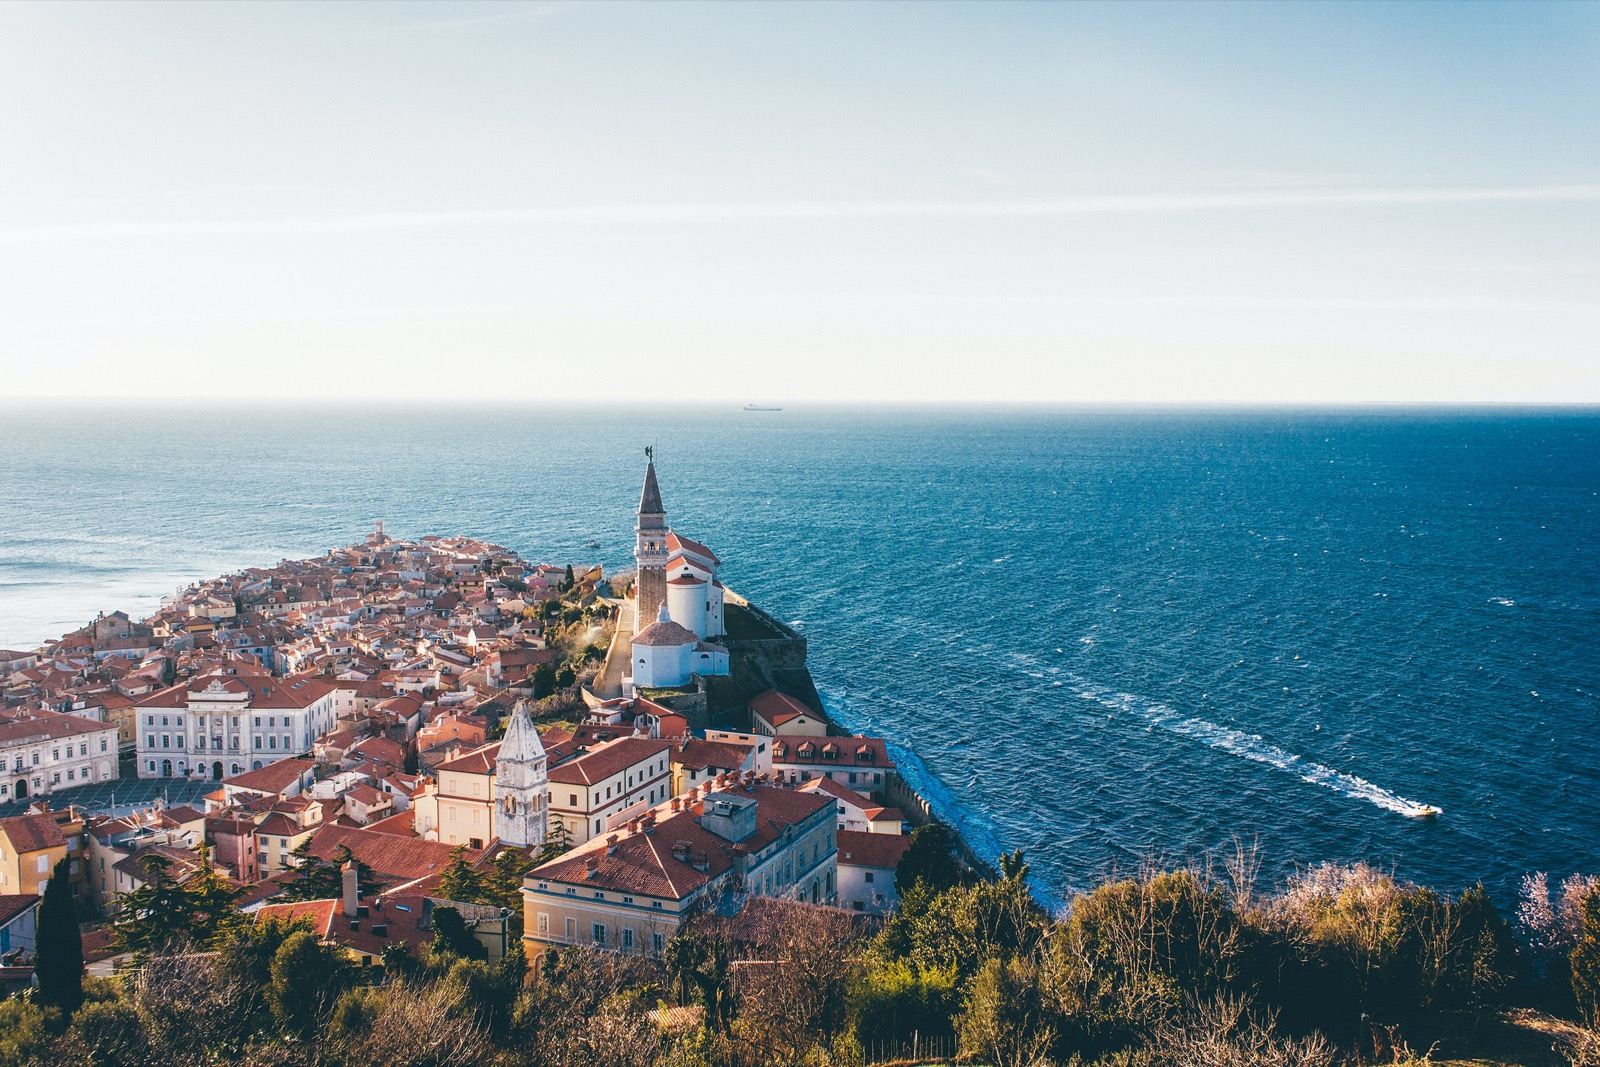 Unfortunately, Most People Will Struggle to Locate These Countries — Can You Get 17/25? Piran, Slovenia